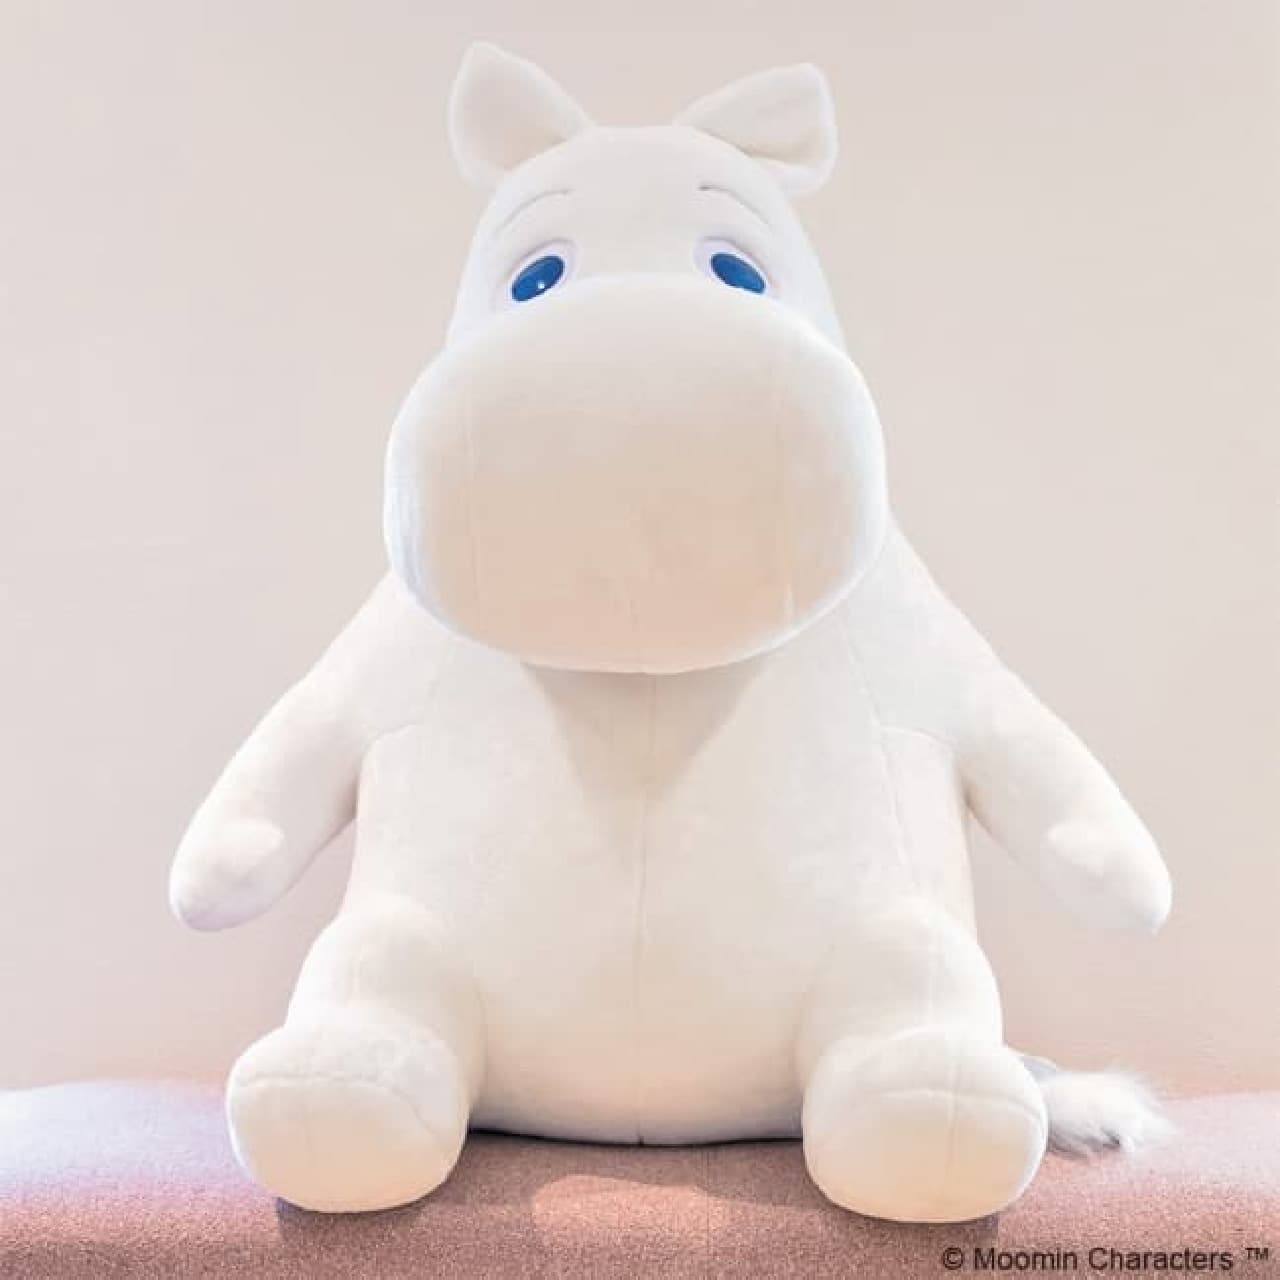 Popular with Moomin Cafe! "Sitting Moomin" will be resold --Oversized size with a height of 75 cm